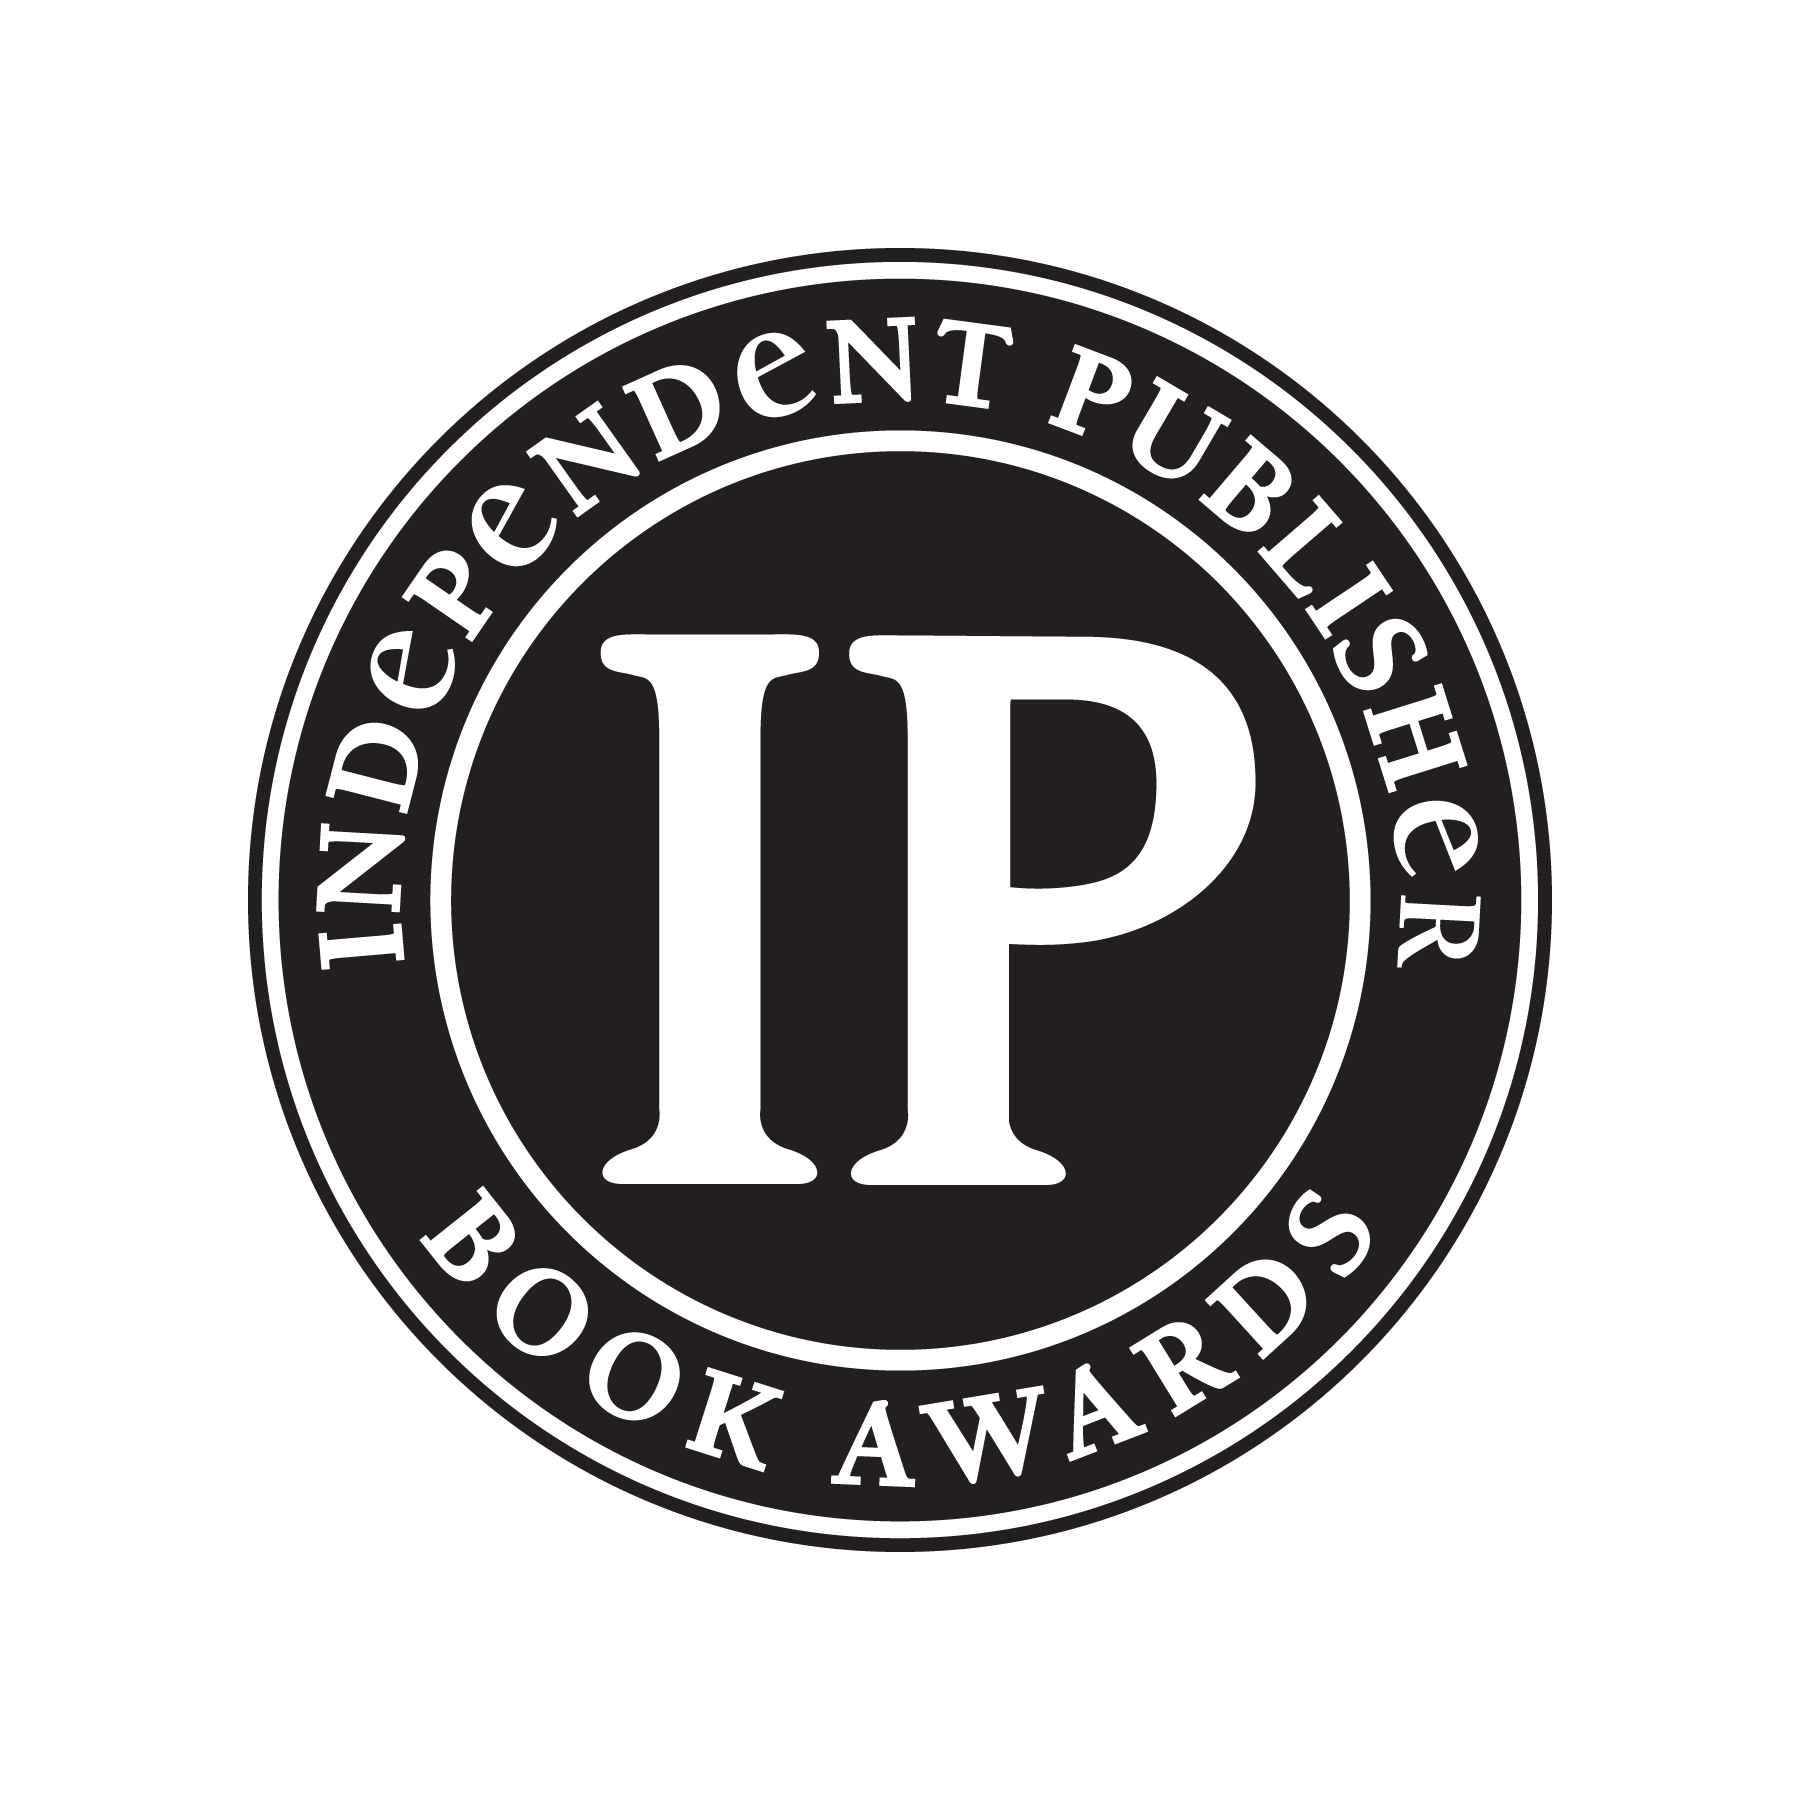 Bywater Books Brings Home IPPY Awards - Bywater Books